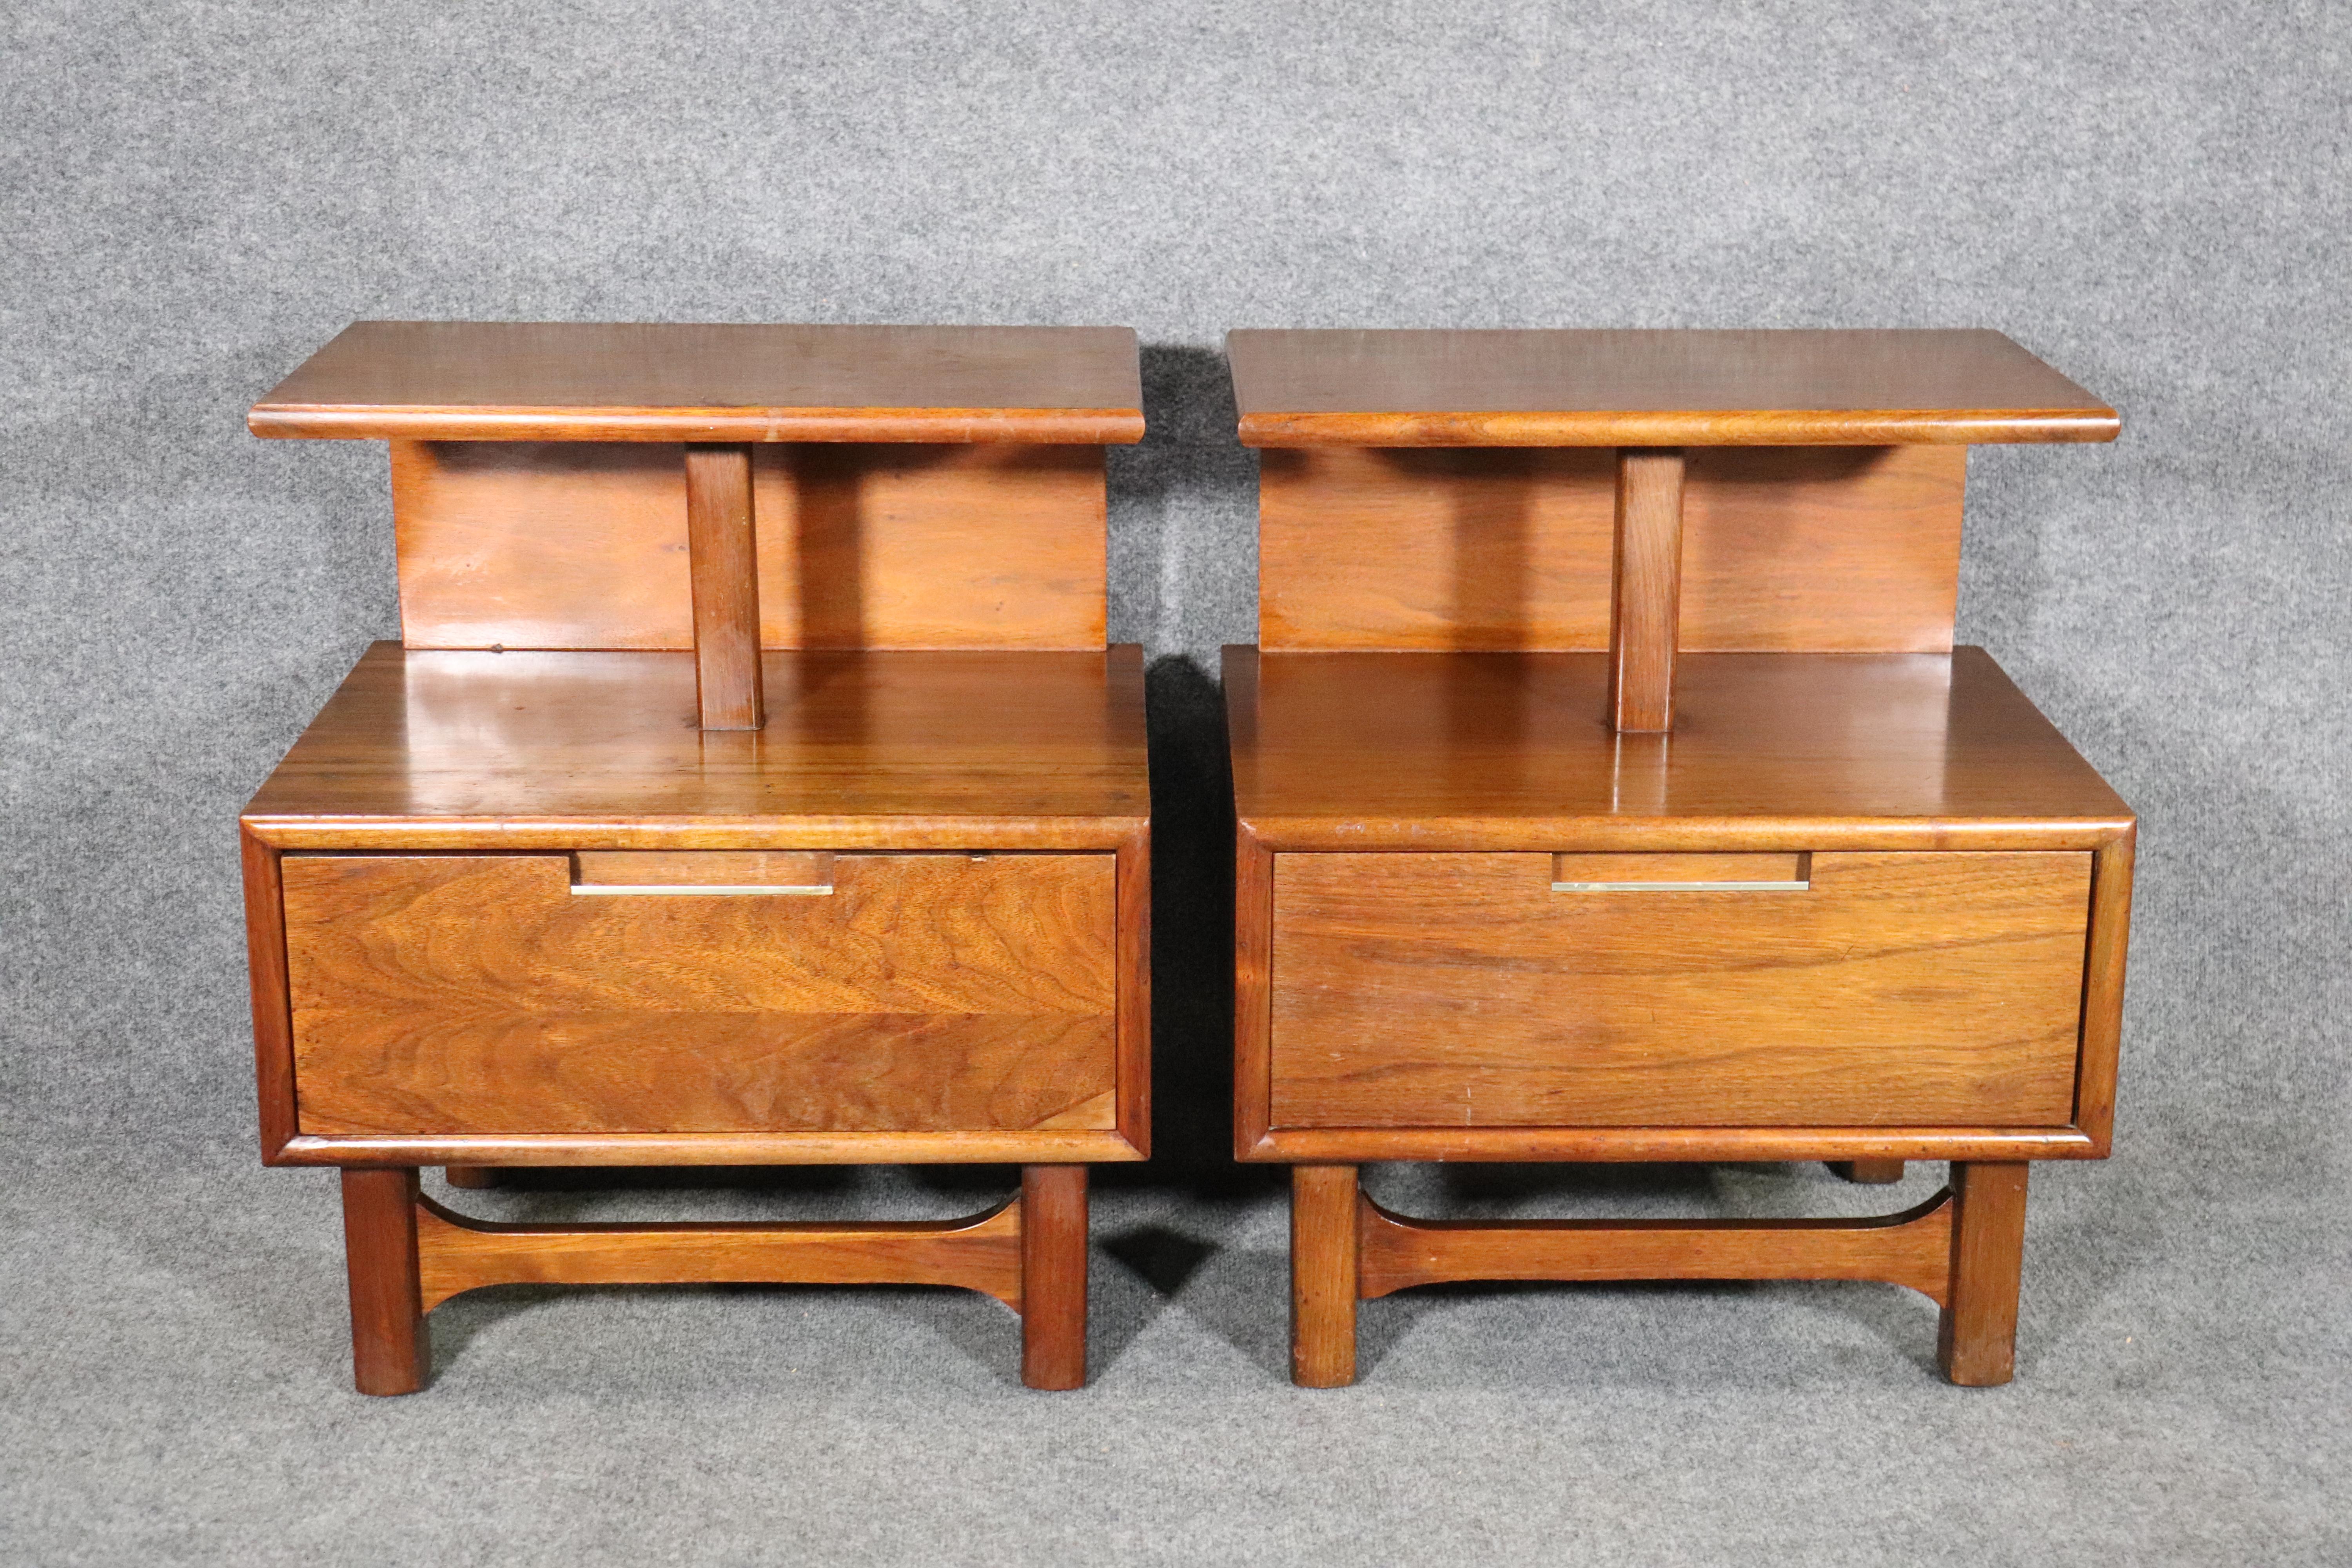 Pair of vintage end tables by Cavalier featuring a top shelf and bottom drawer for storage. Warm walnut grain and accenting brass trim handle.
Please confirm location.